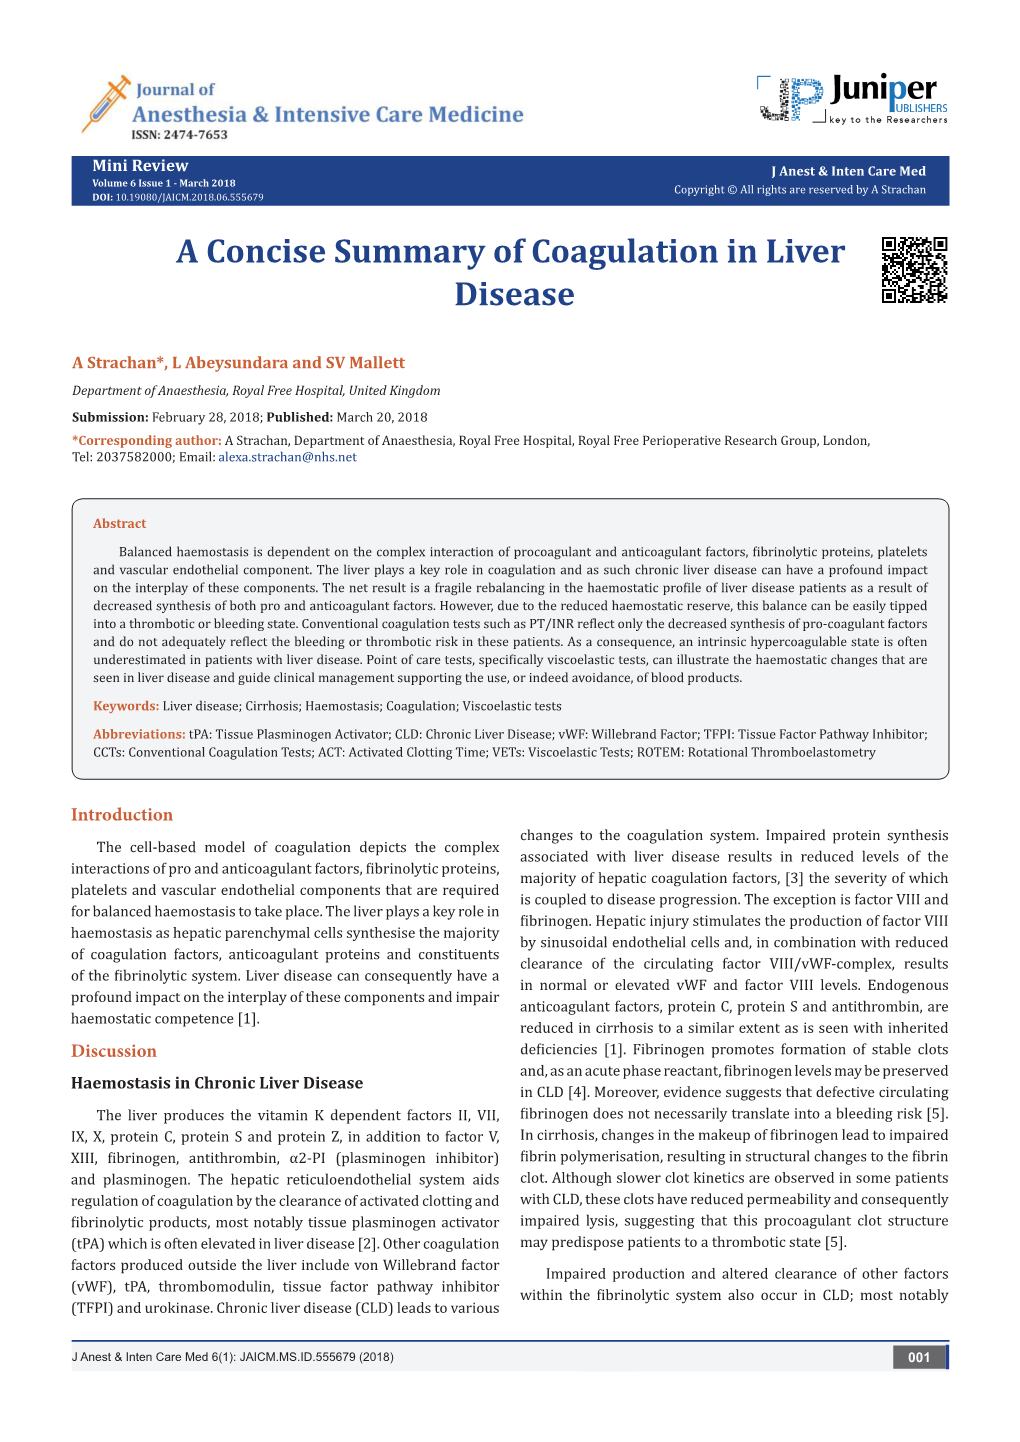 A Concise Summary of Coagulation in Liver Disease